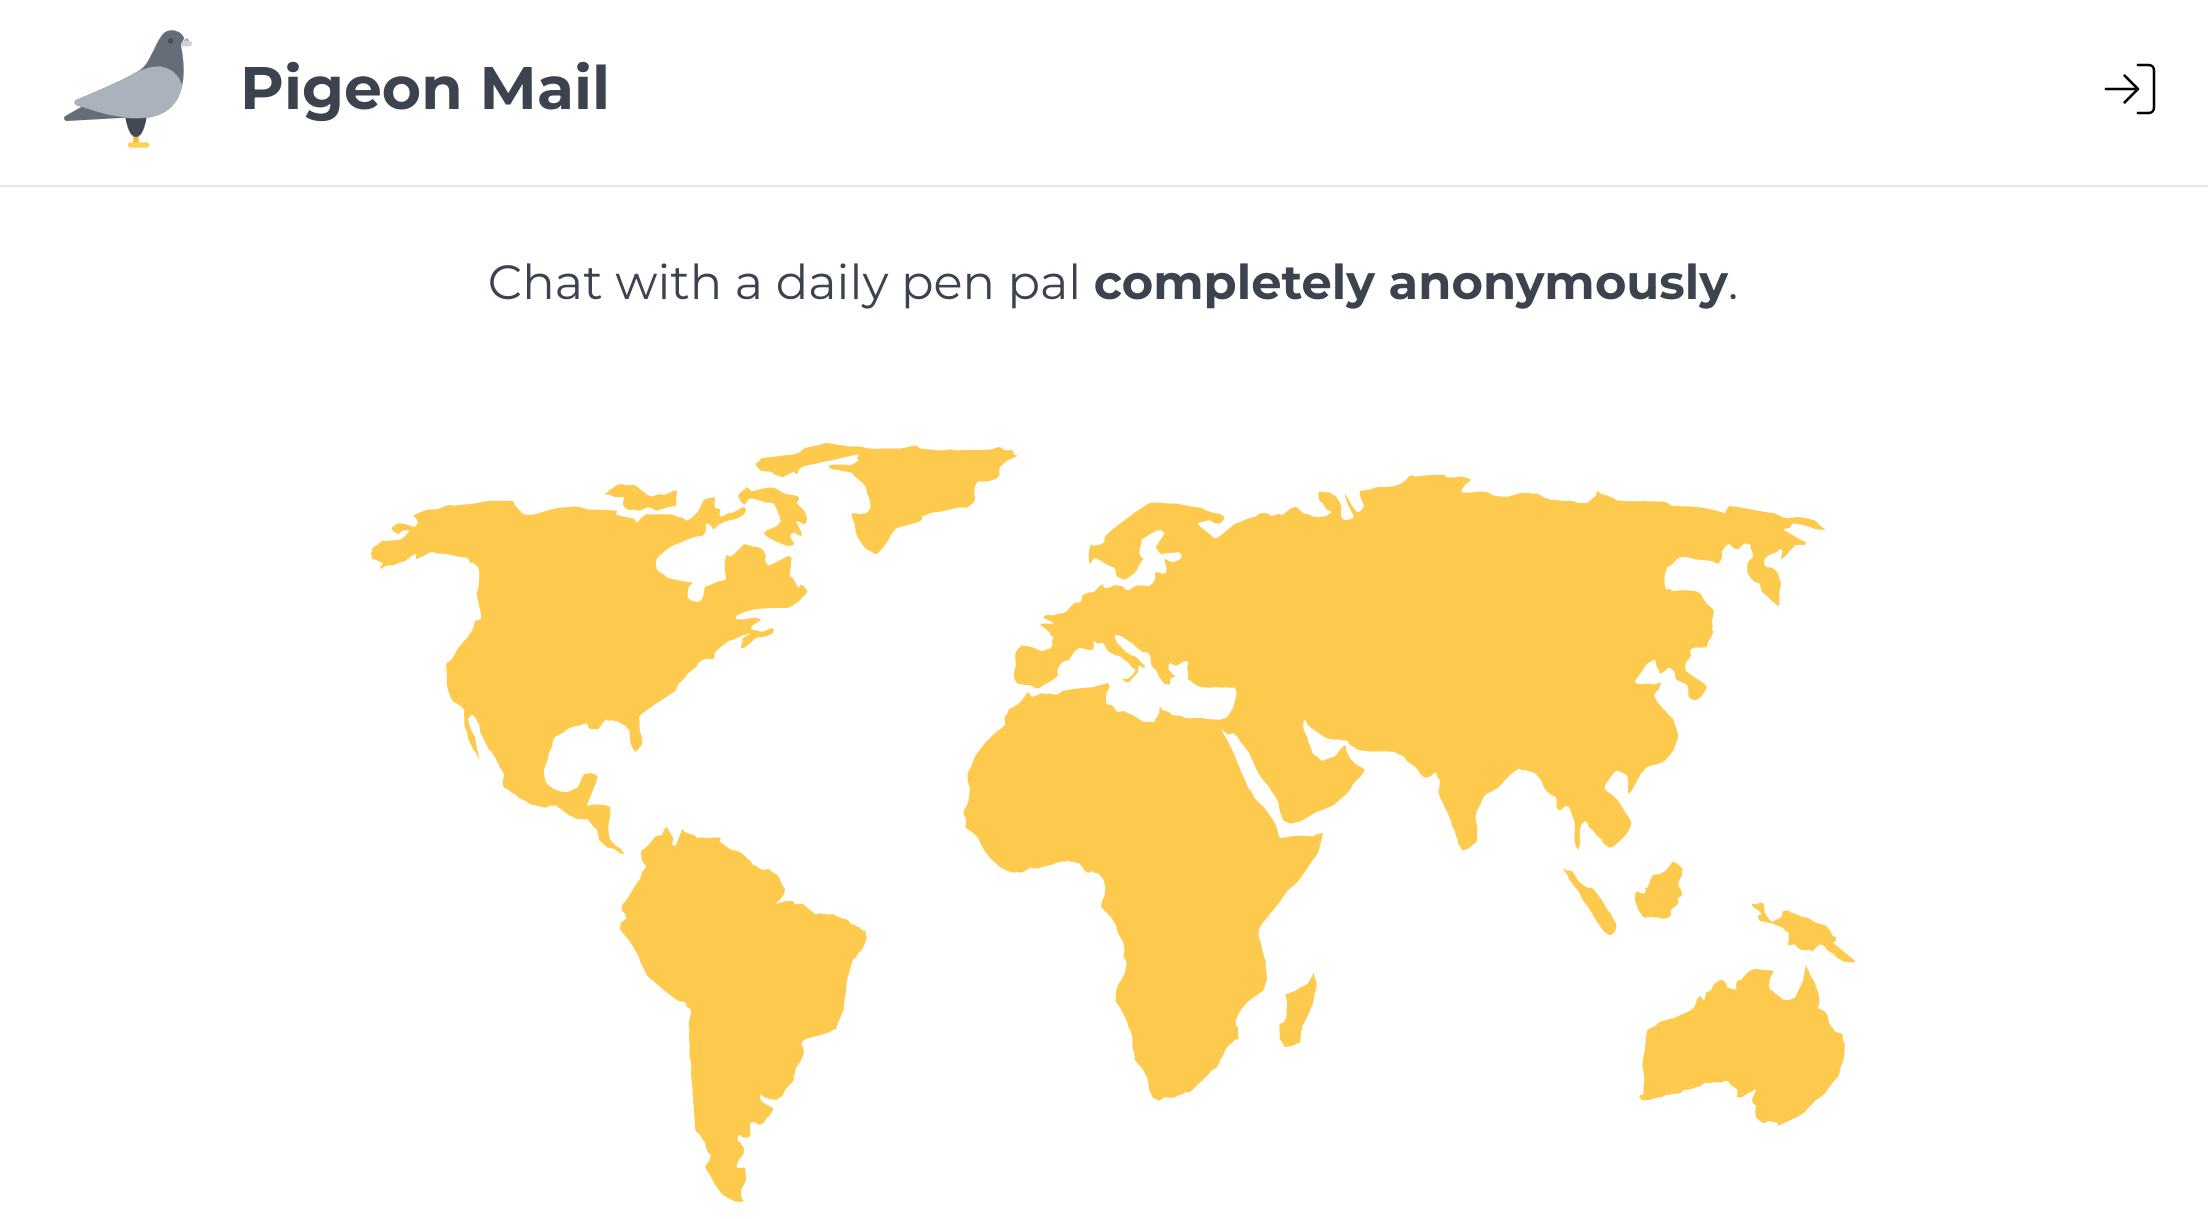 A screenshot of Pigeon Mail's homepage, containing a large world map and the tagline previously mentioned.